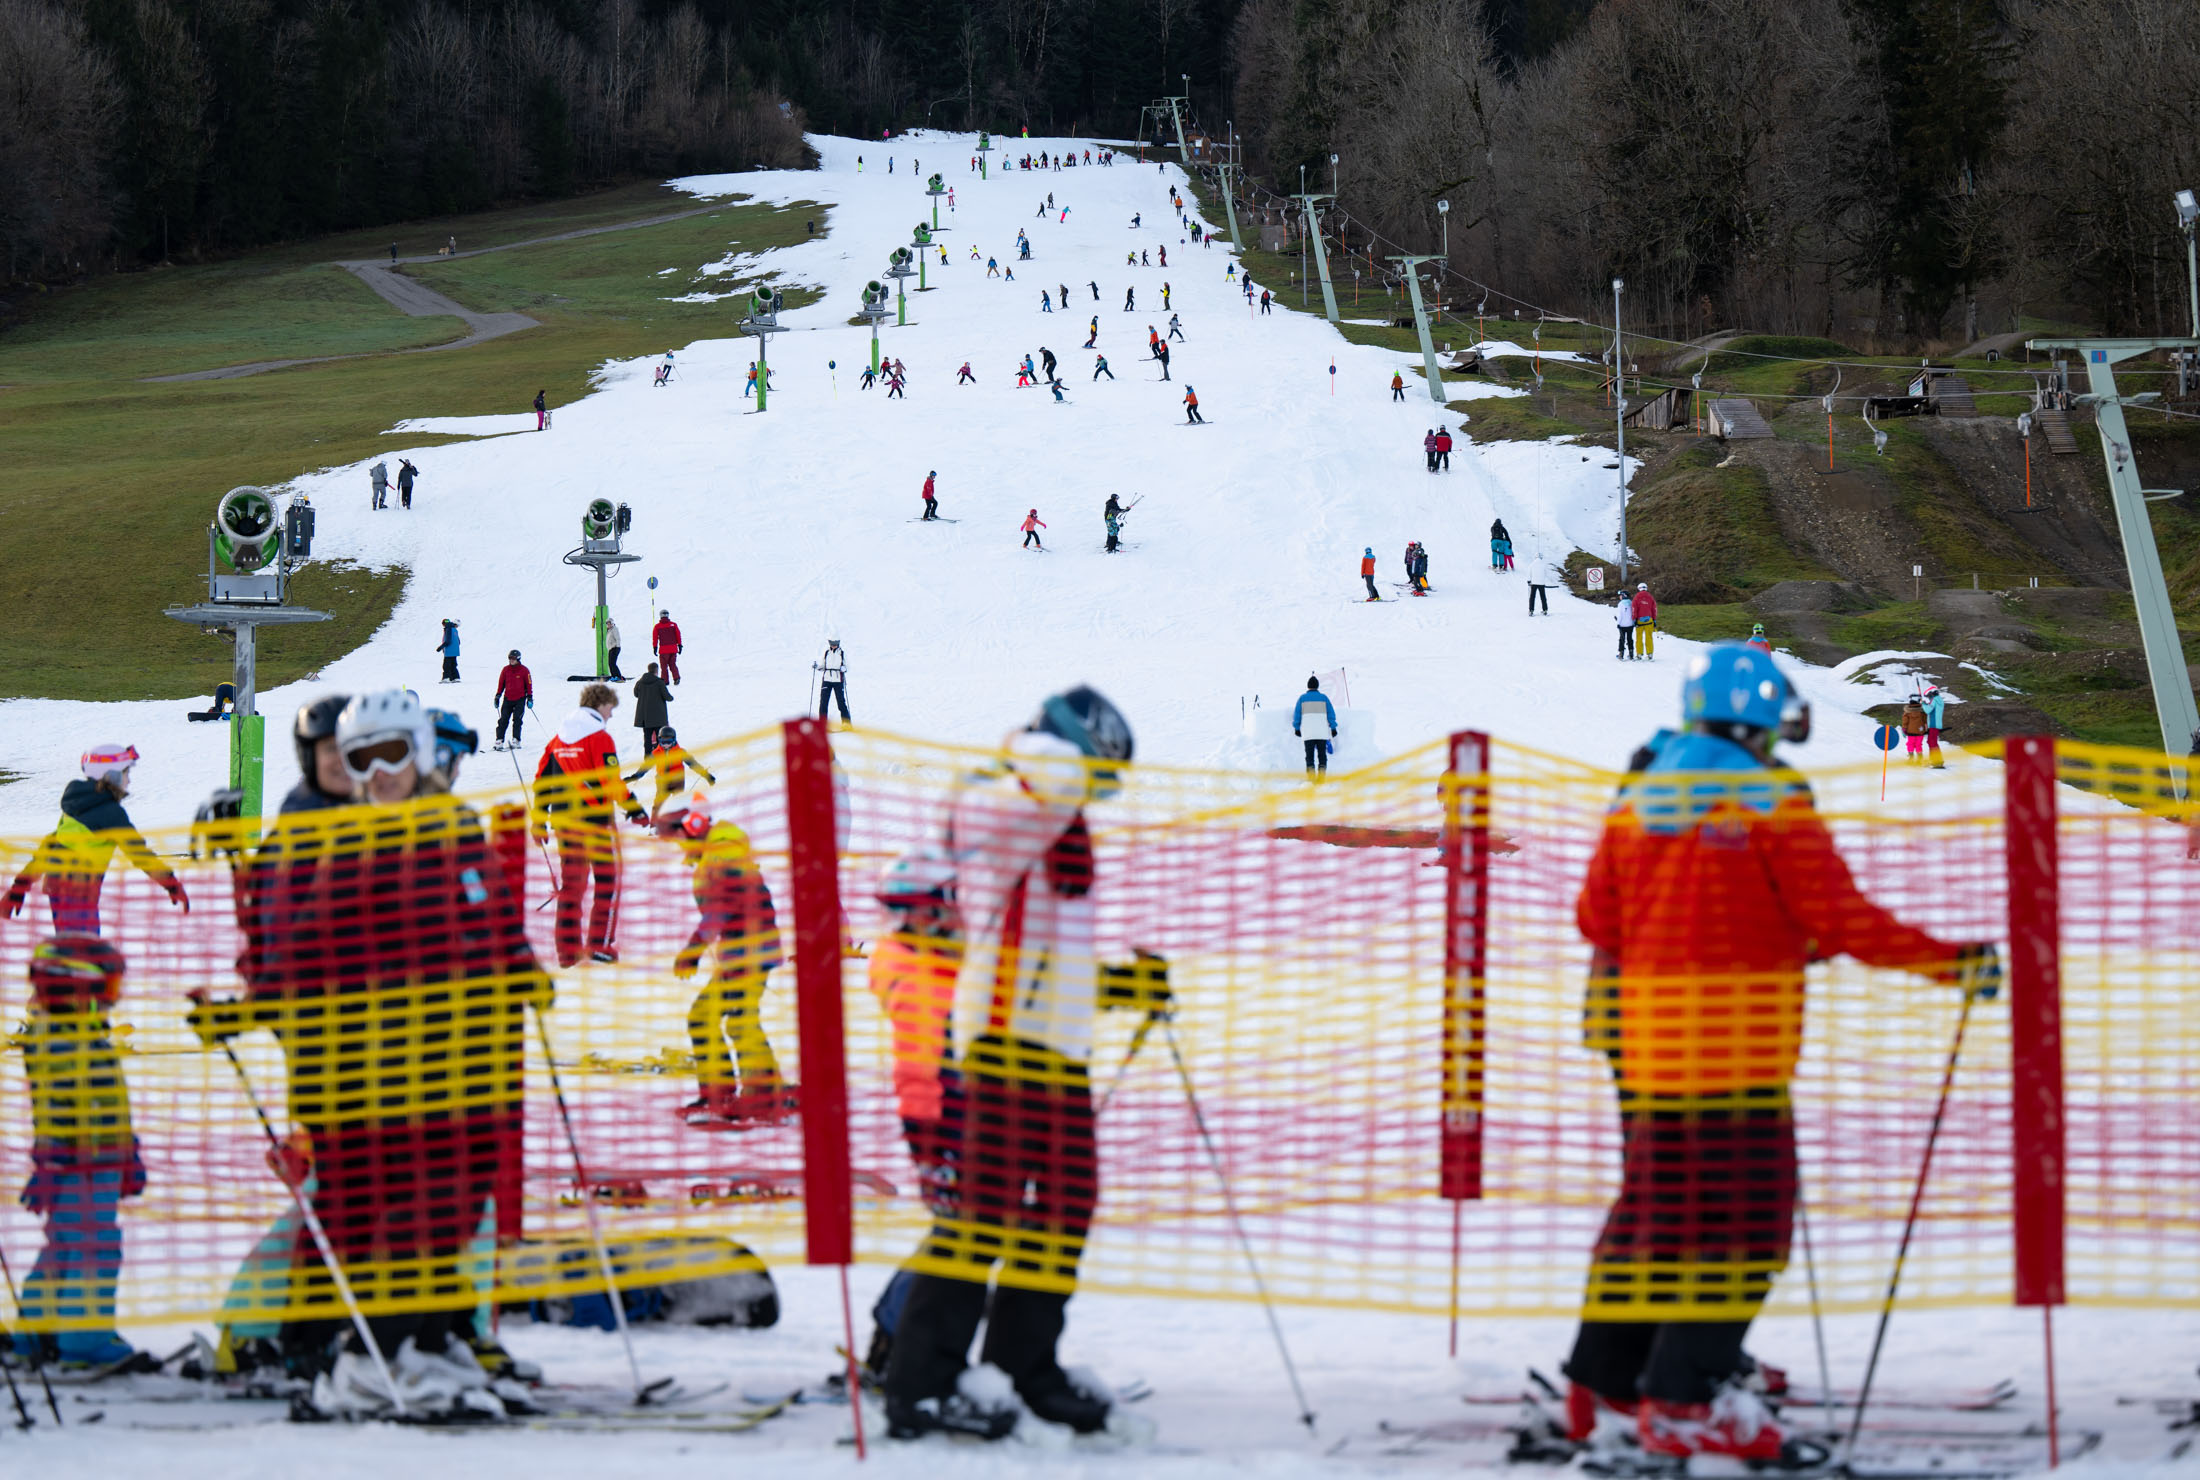 Skiers and snowboarders queue up for the&nbsp;lift at&nbsp;Brauneck mountain, on Dec. 28, in Germany, where many ski resorts are currently suffering from a lack of snowfall.&nbsp;